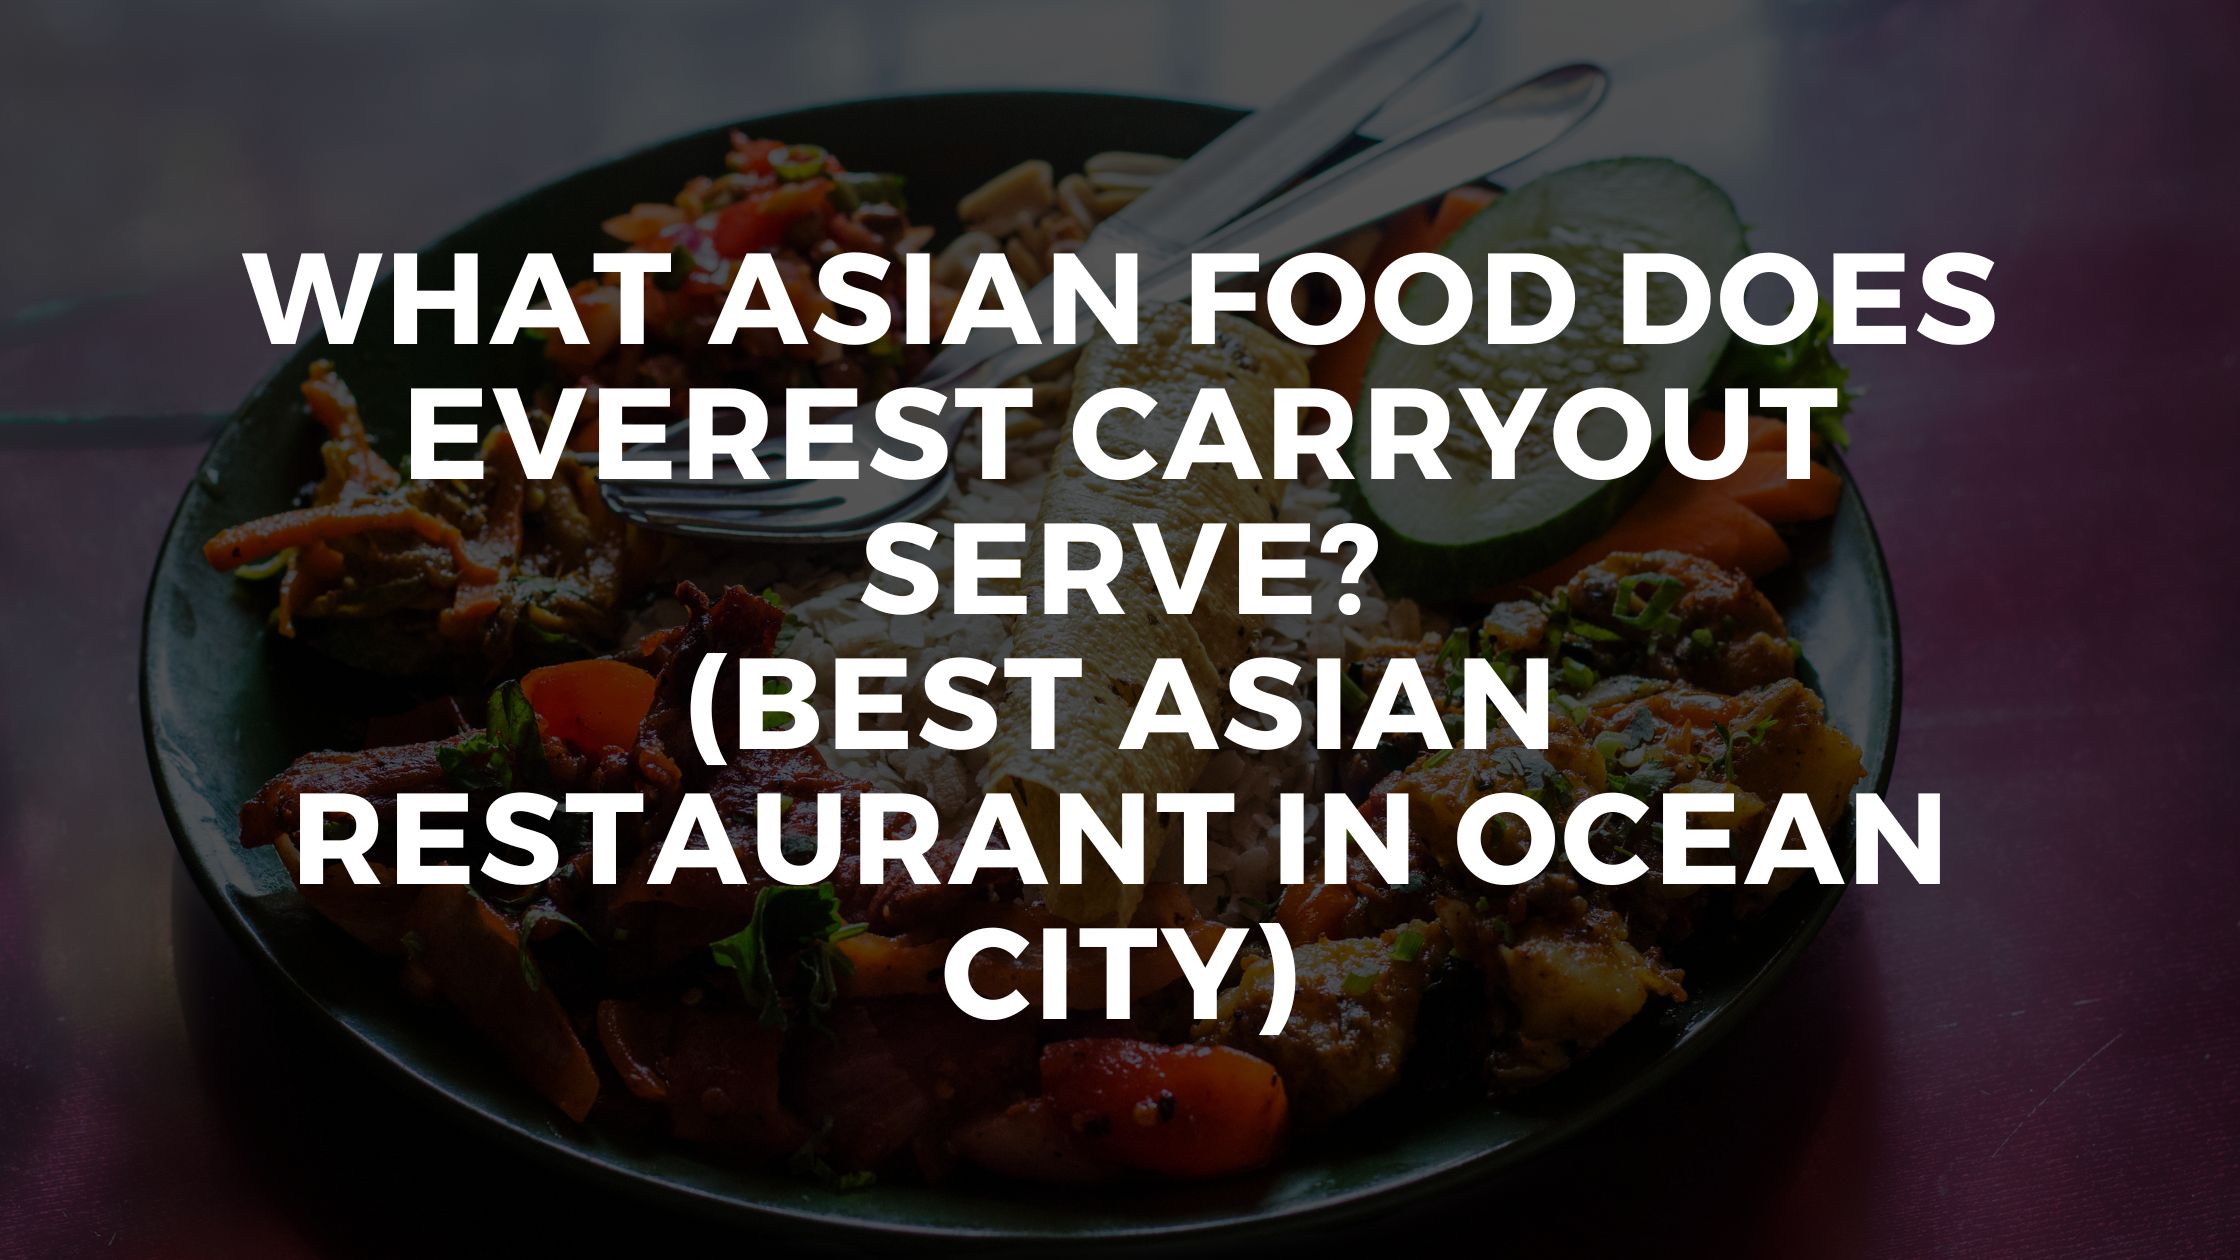 What Asian Food Does Everest Carryout Serve? (Best Asian Restaurant In Ocean City)